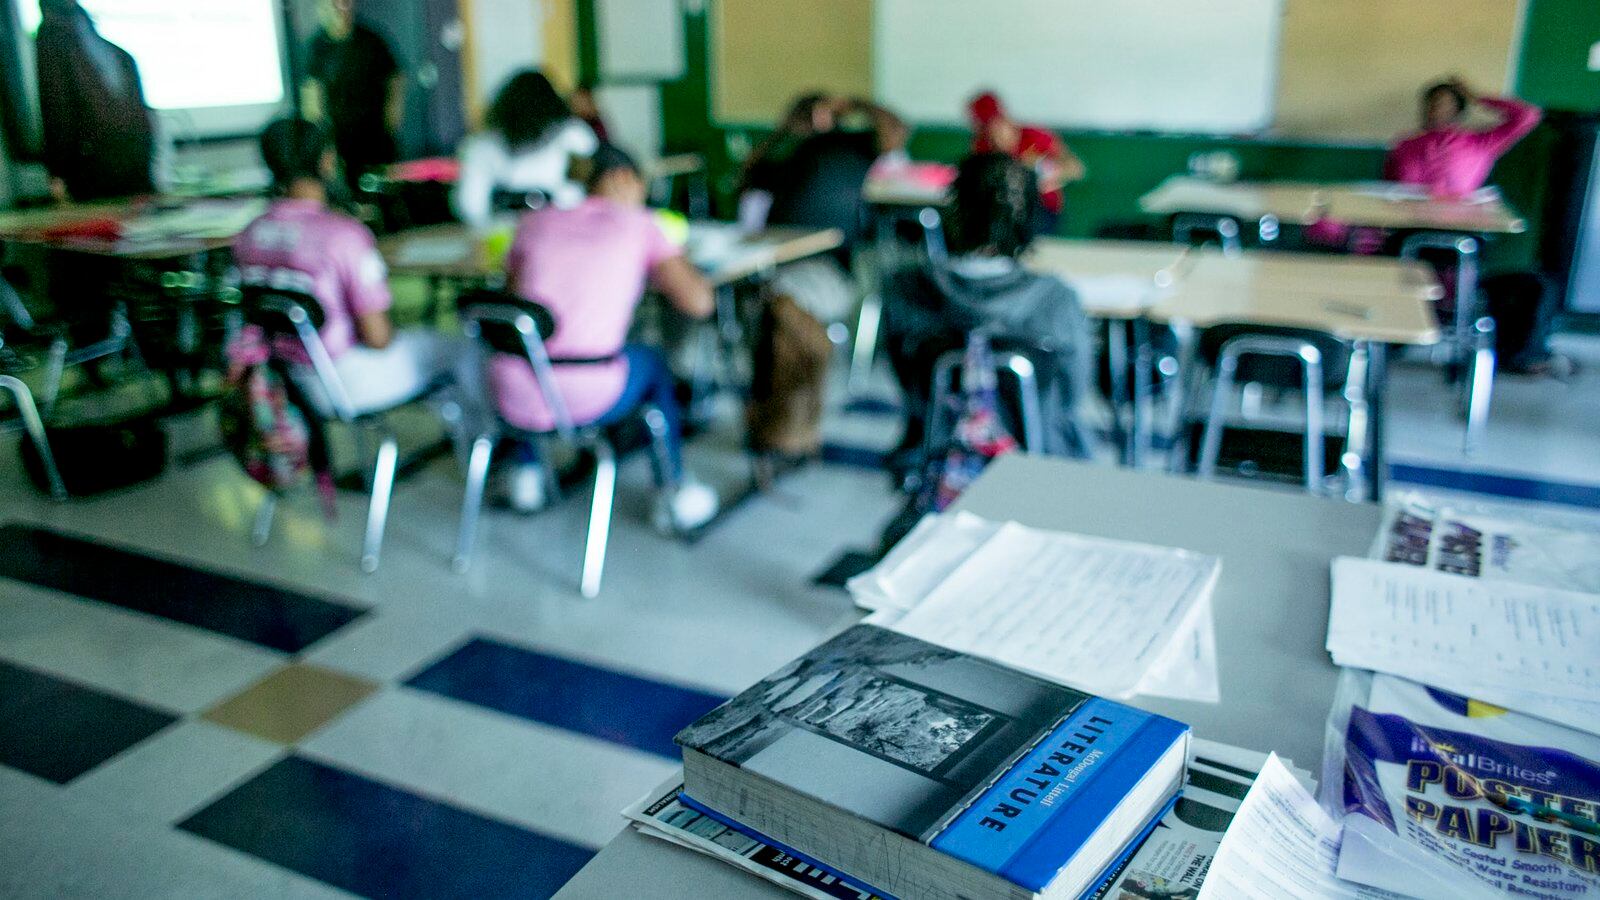 Textbooks are in the foreground with students seated at desks in the background.